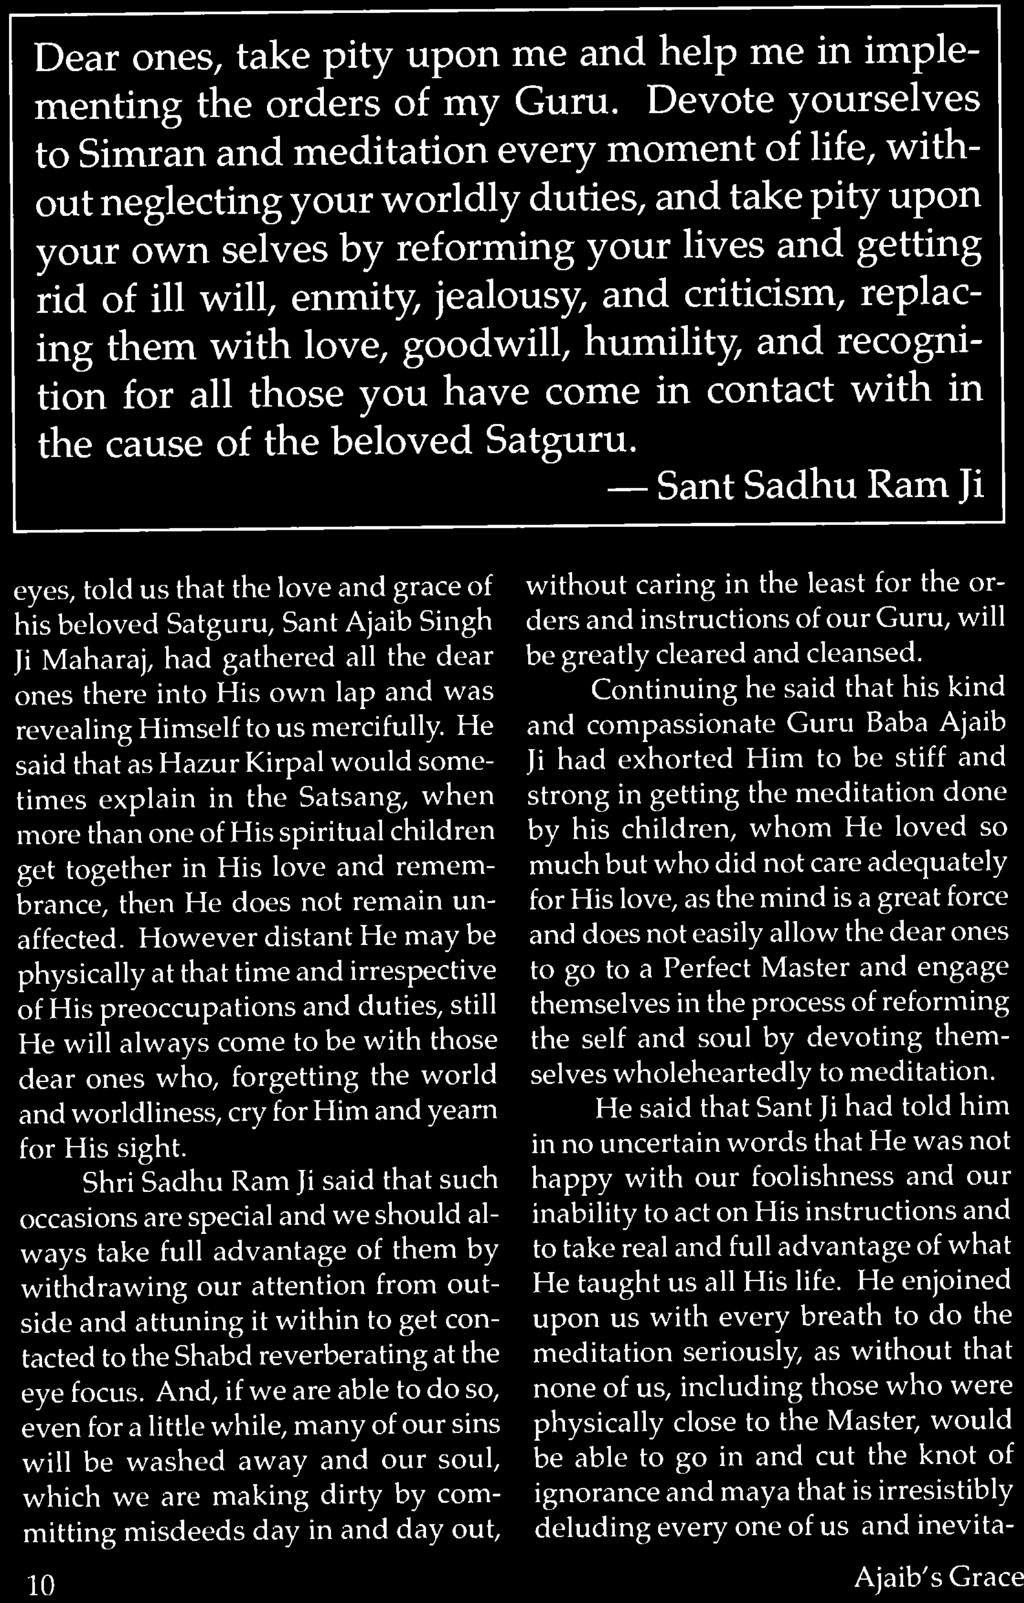 enmity, jealousy, and criticism, replacing them with love, goodwill, humility and recognition for all those you have come in contact with in the cause of the beloved Satguru.